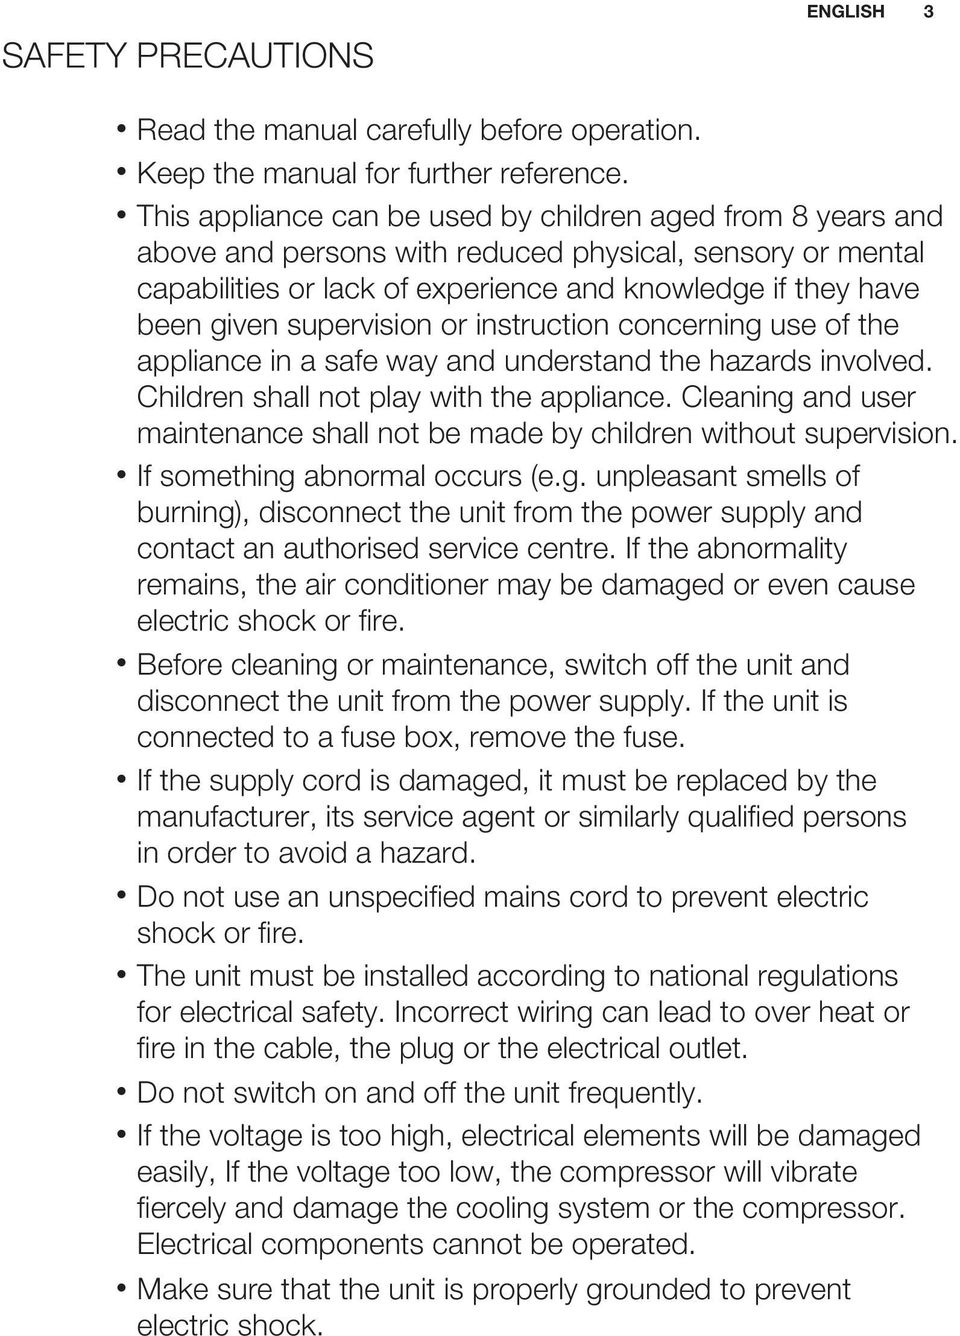 supervision or instruction concerning use of the appliance in a safe way and understand the hazards involved. Children shall not play with the appliance.